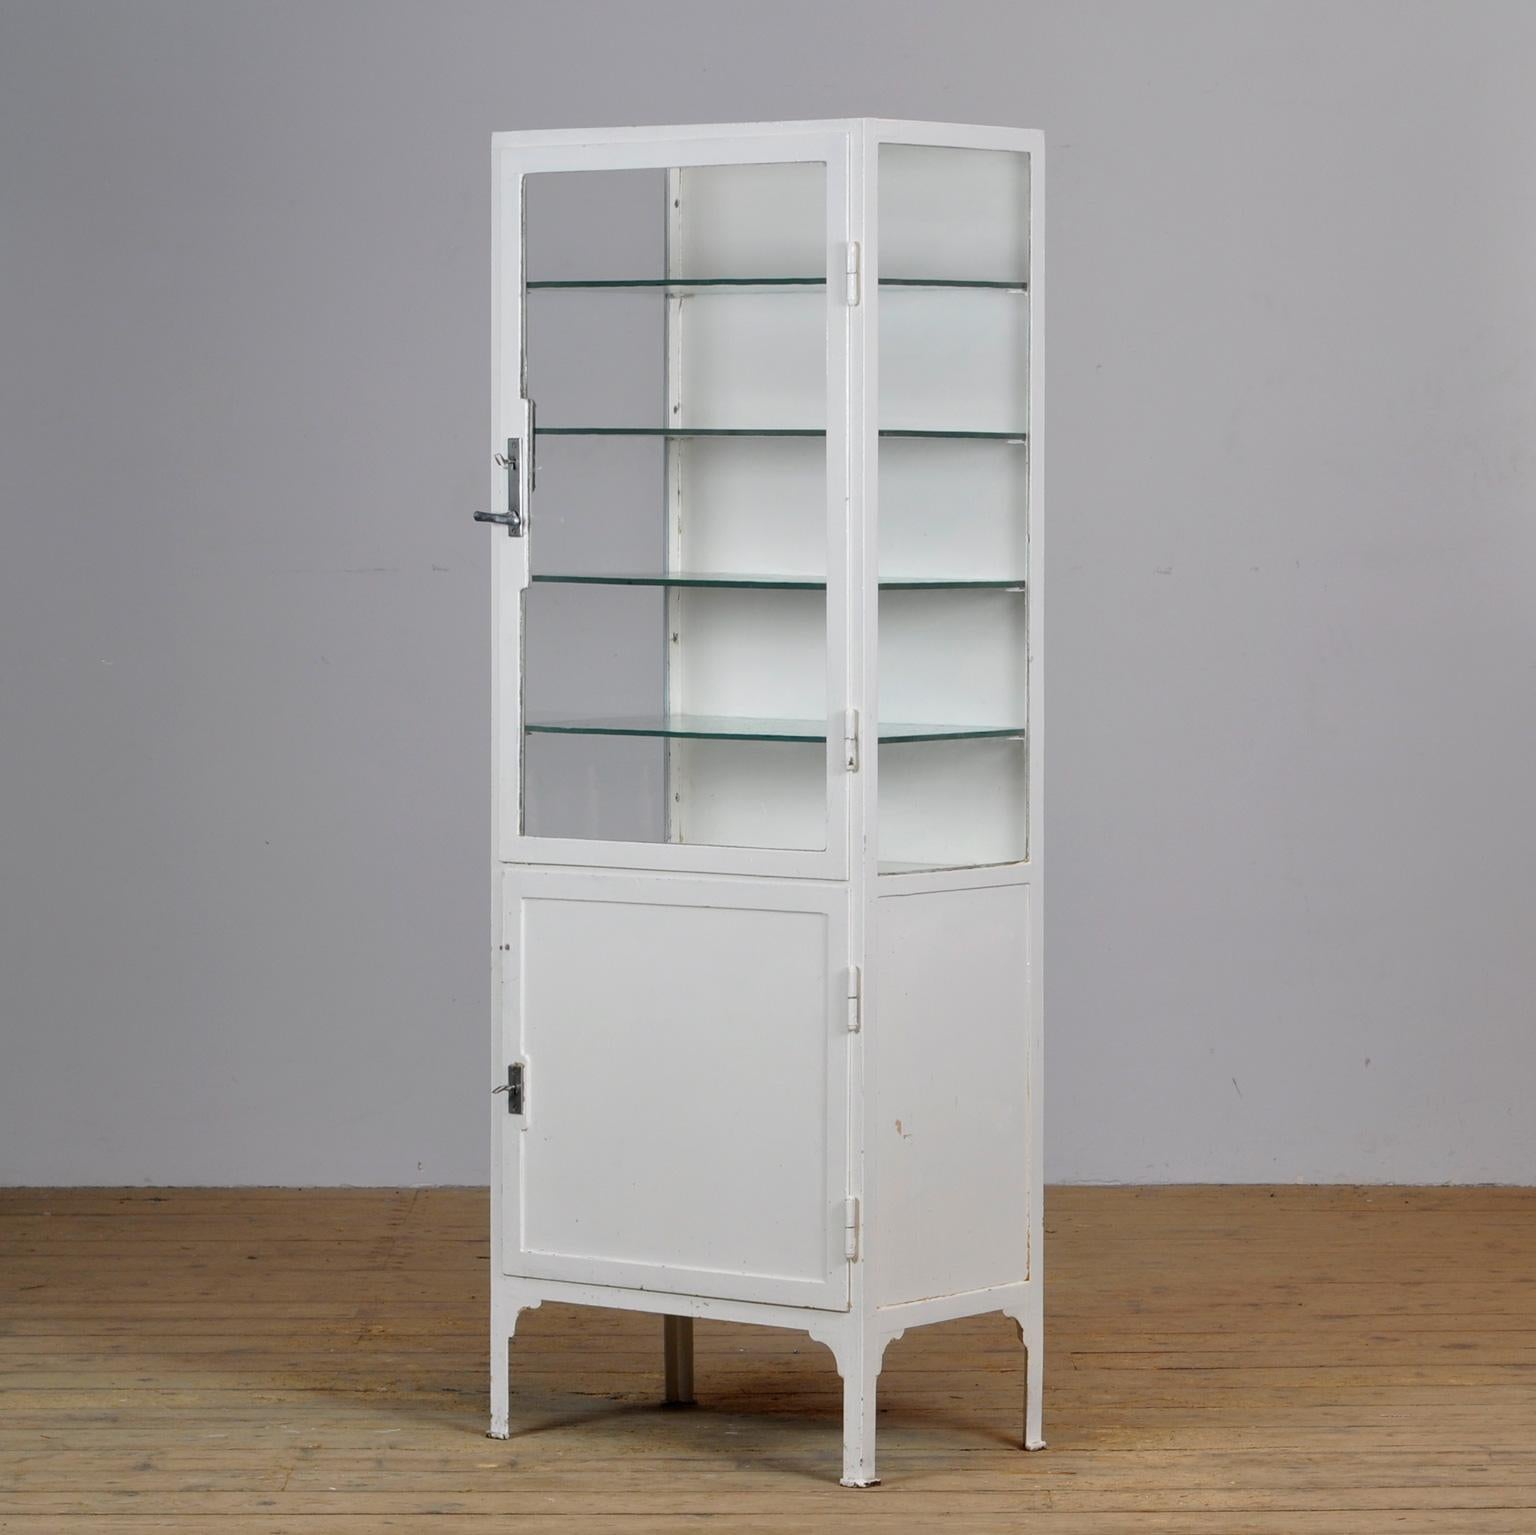 Hungarian Medical Iron and Glass Cabinet, 1930s